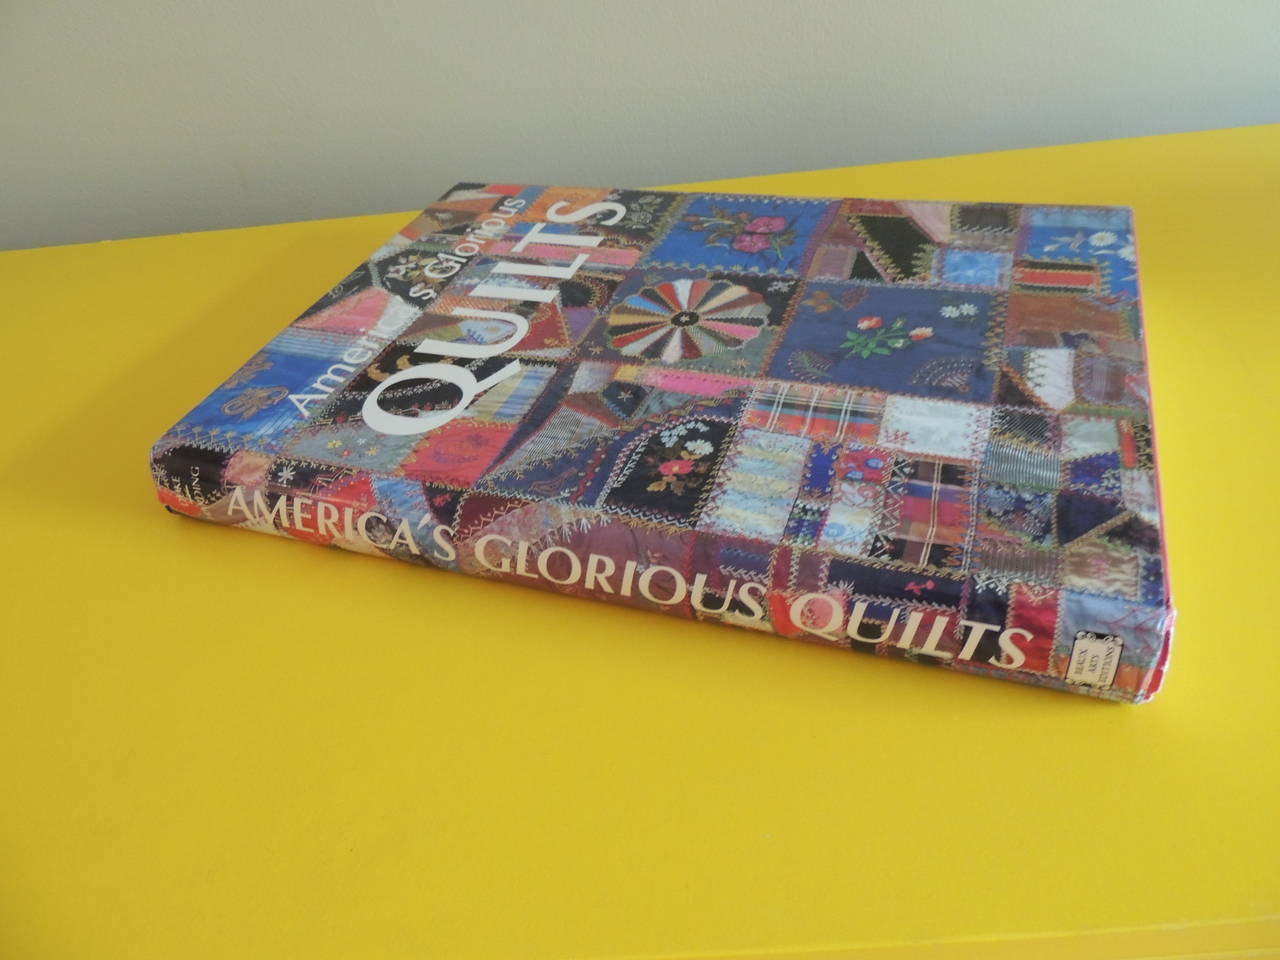 Late 20th Century America's Glorious Quilts Book